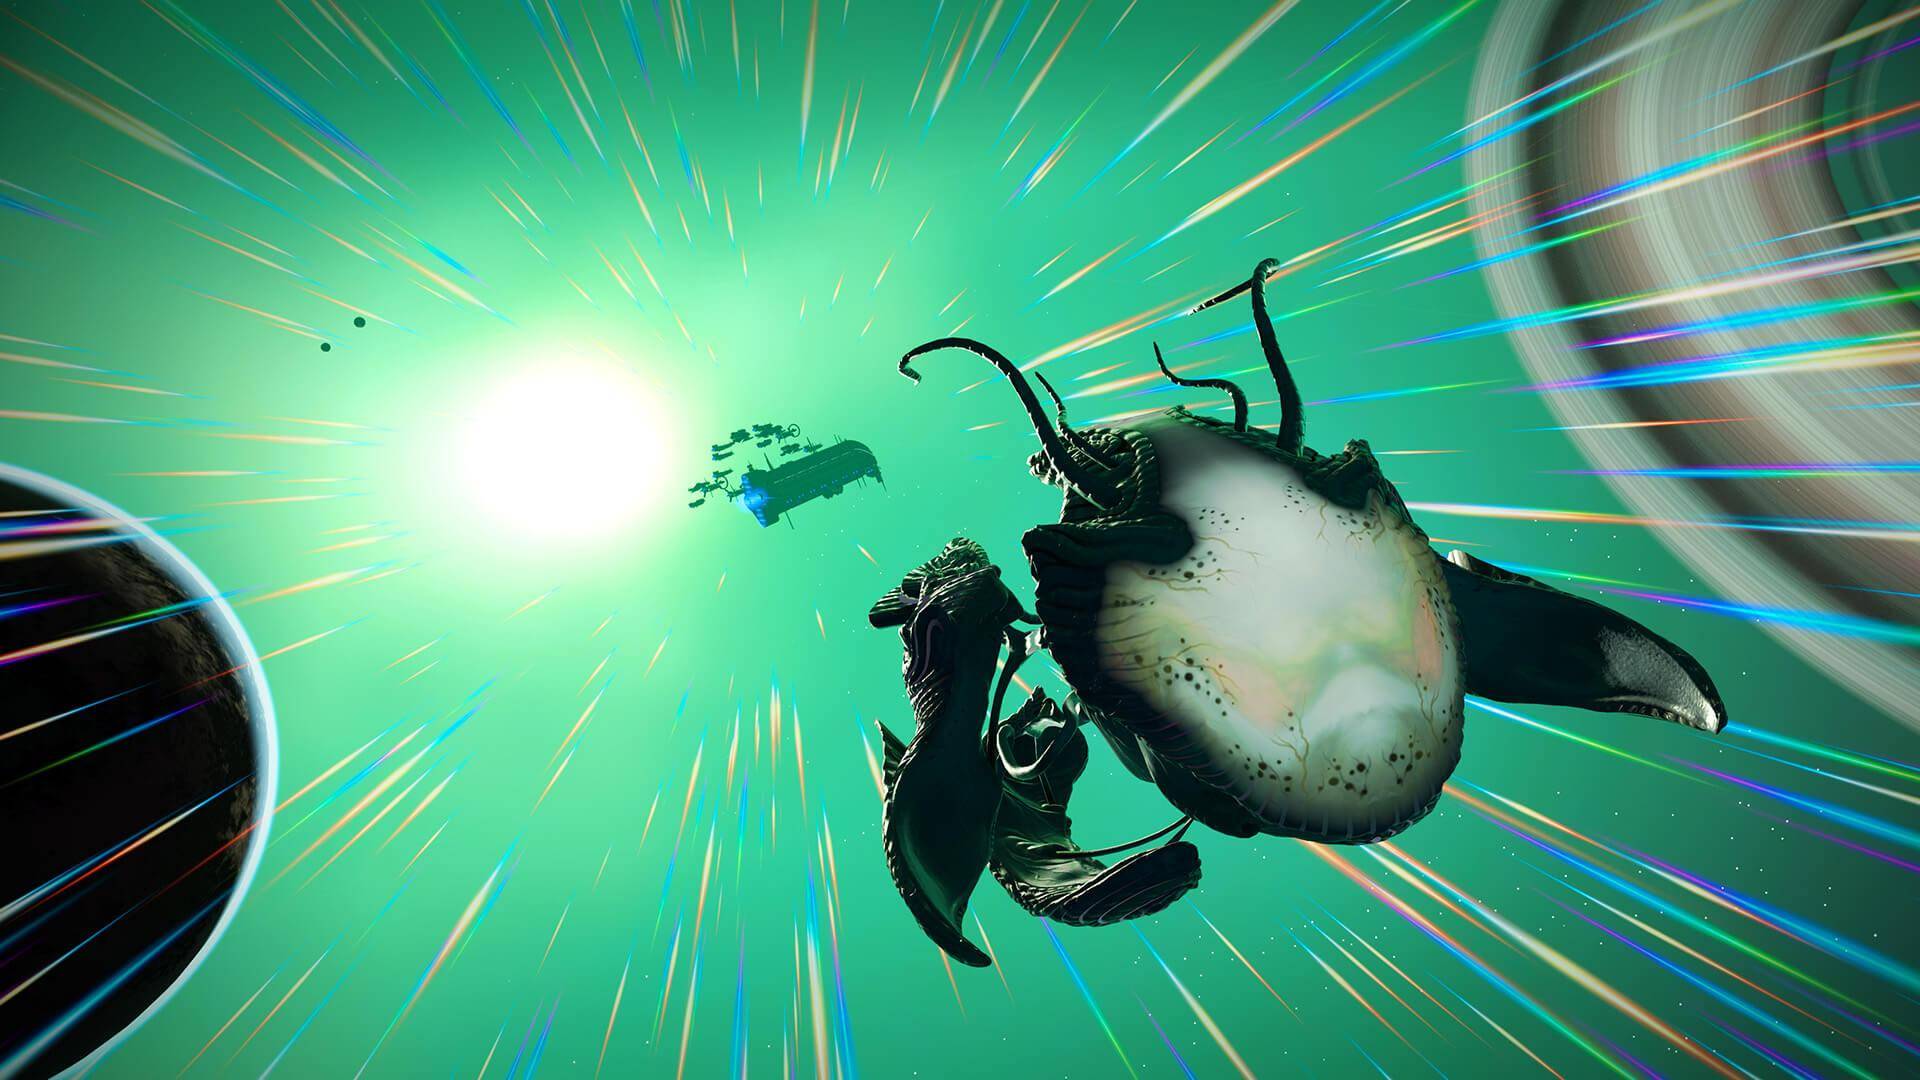 No Man's Sky surprises players with a biological ship